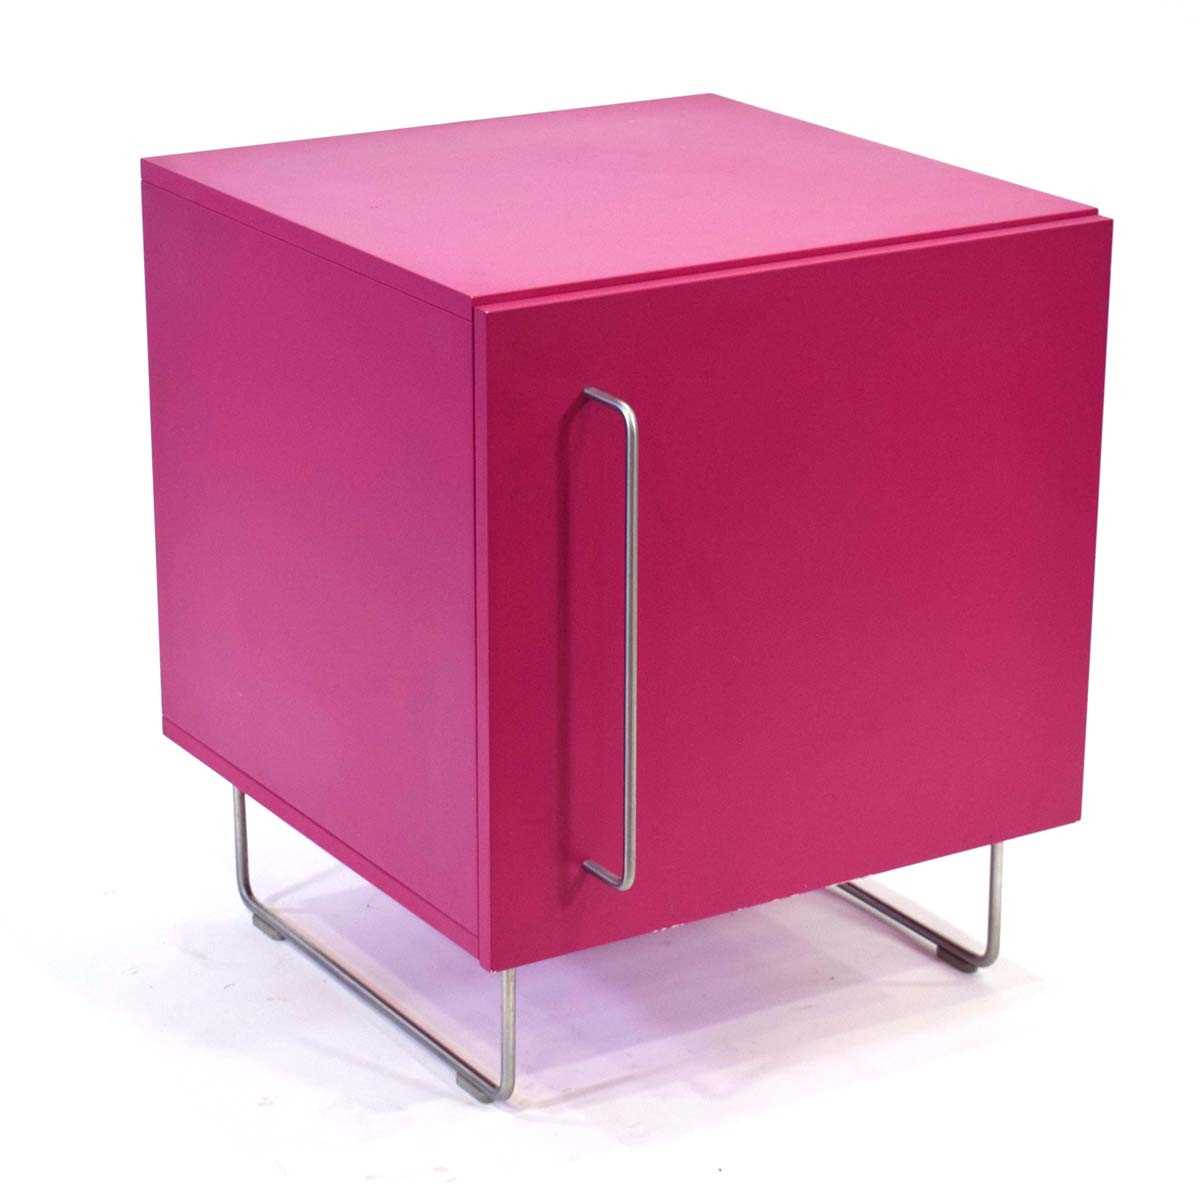 Jasper Morrison for Cappellini, a 'Plan' Range pink lacquered single-door cabinet with stainless - Bild 2 aus 3